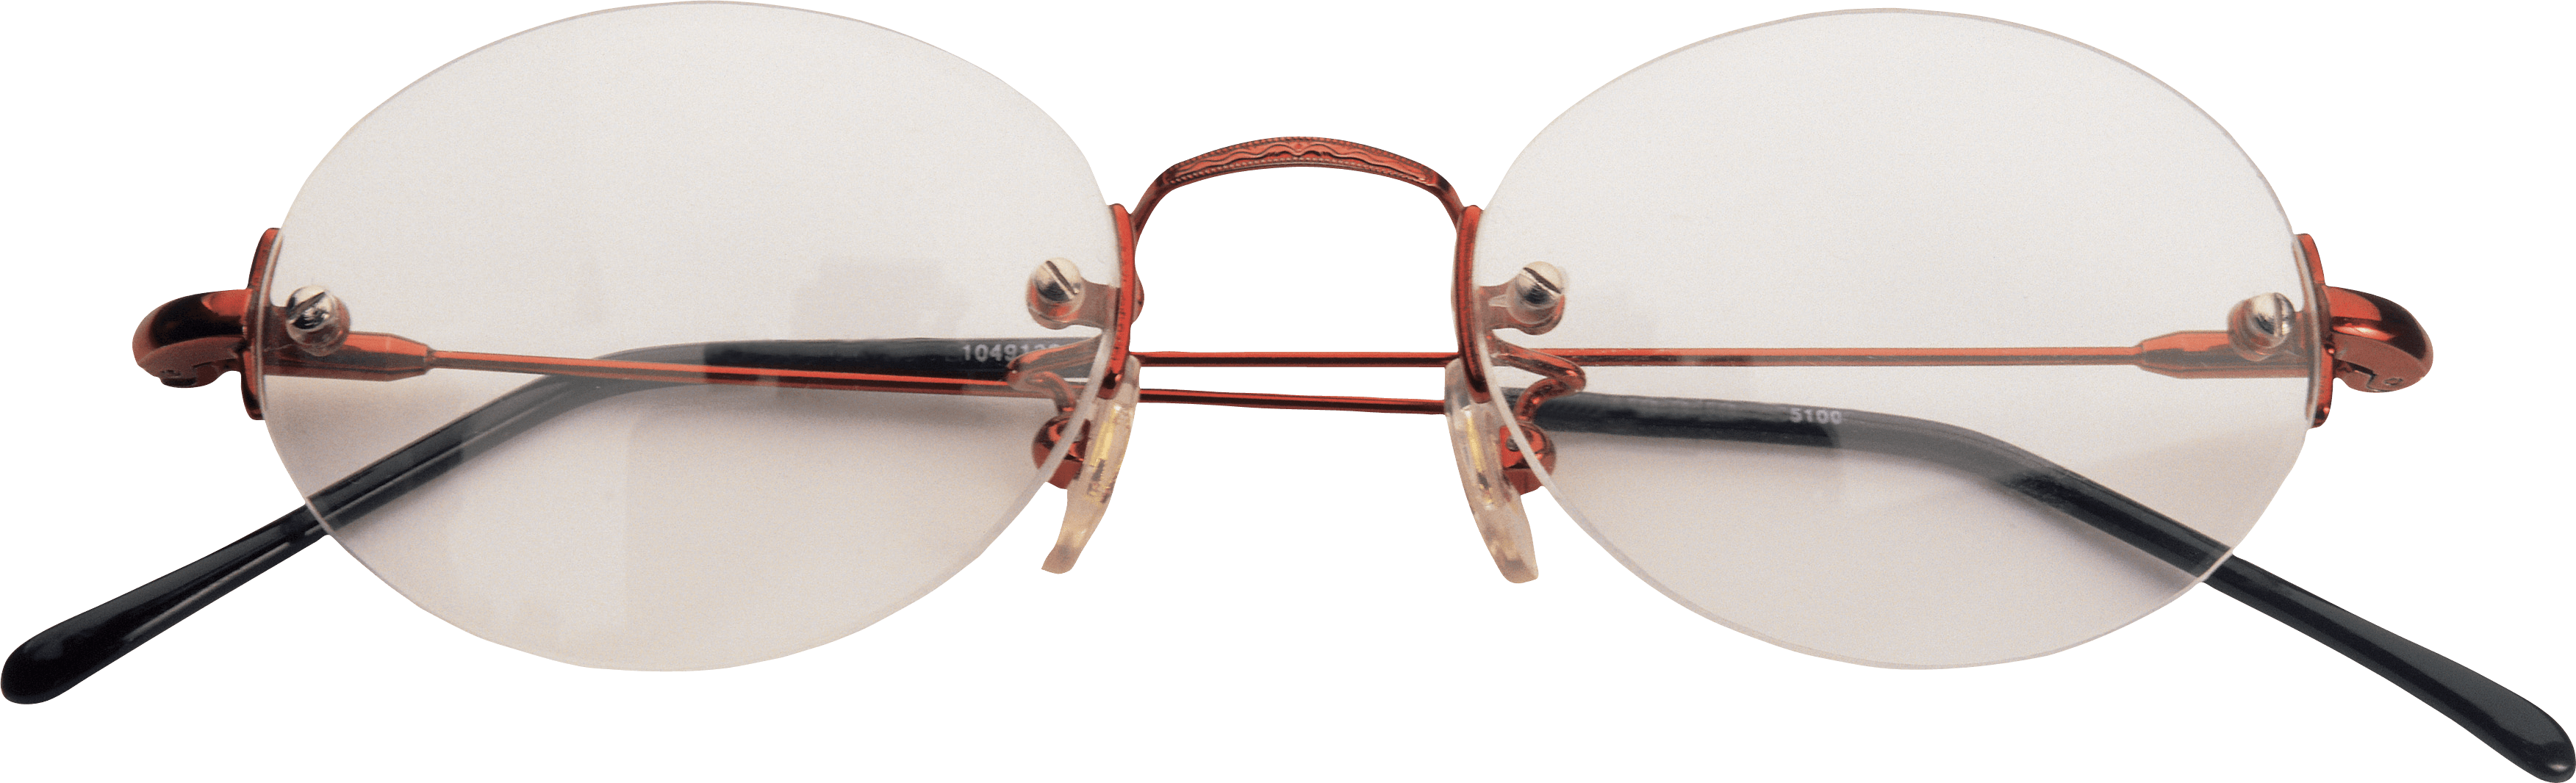 Specs Twins Spectacle Goggles Fantastic PNG